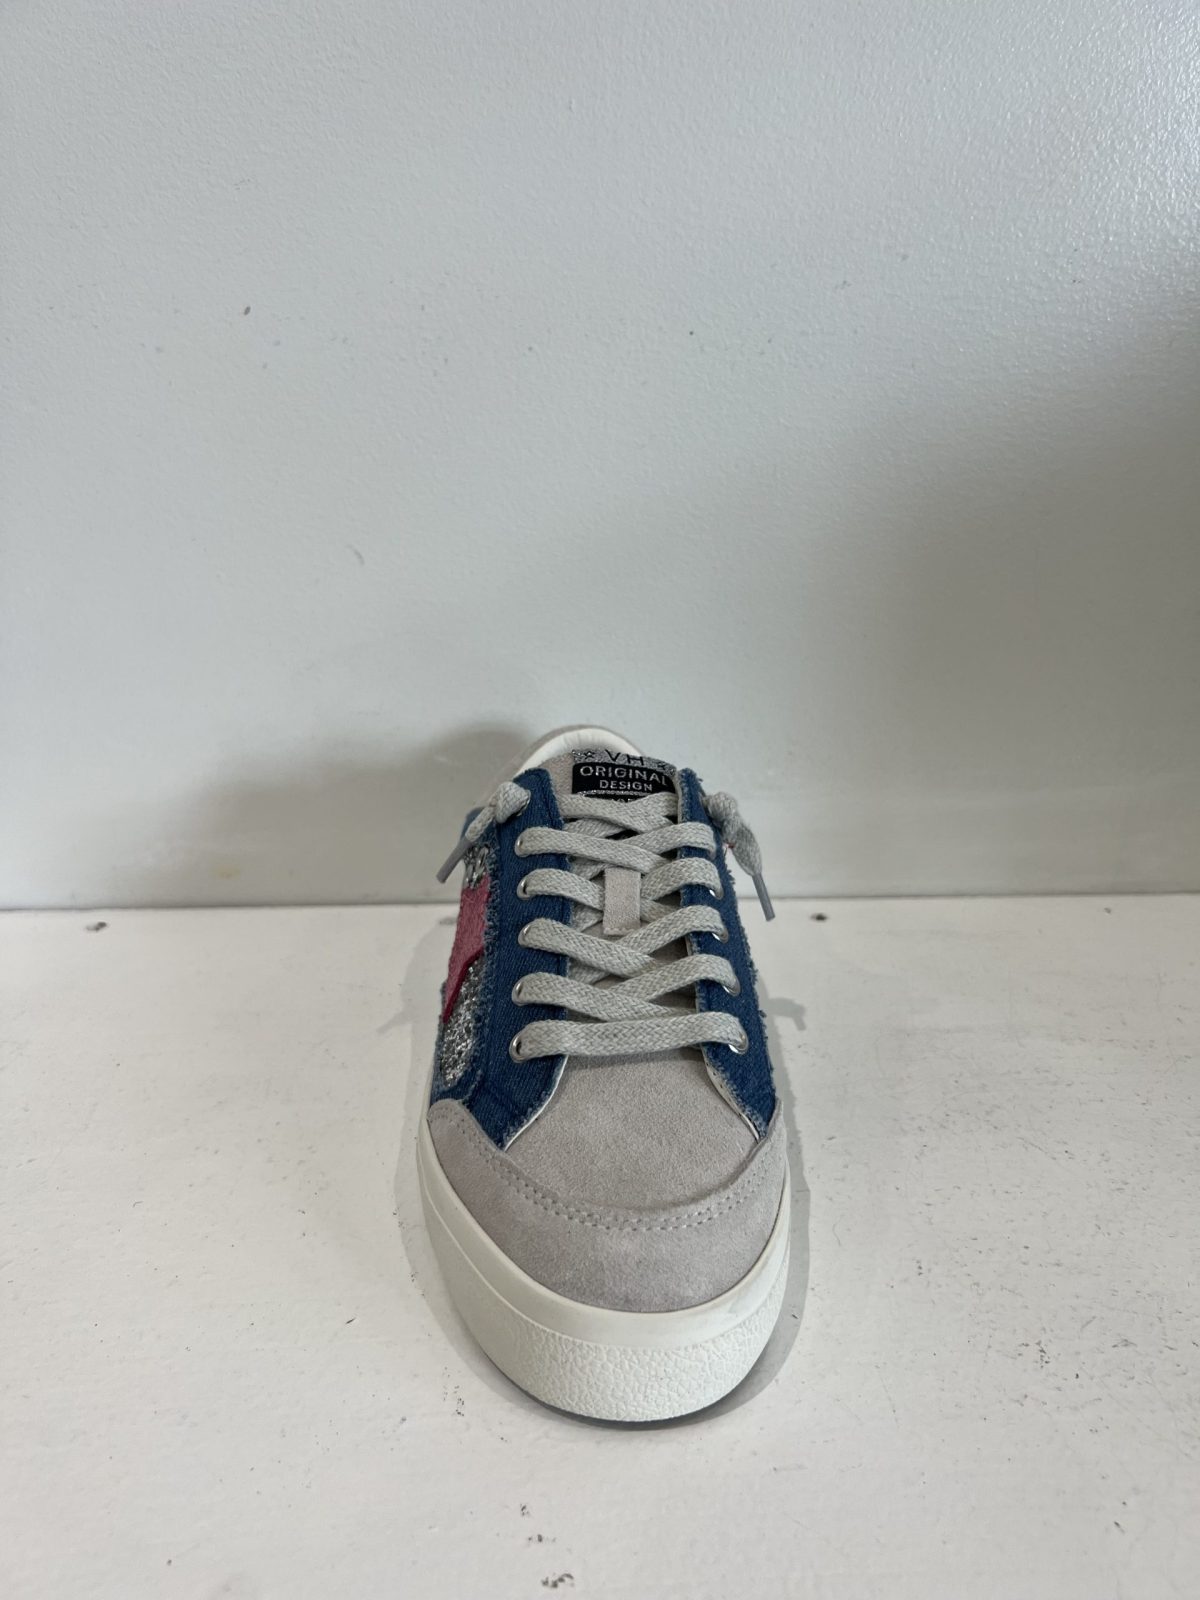 Vintage Havana Selene Denim Sparkle Star Detail Leather Sneaker | Ooh Ooh Shoes women's clothing and shoe boutique located in Naples and Mashpee